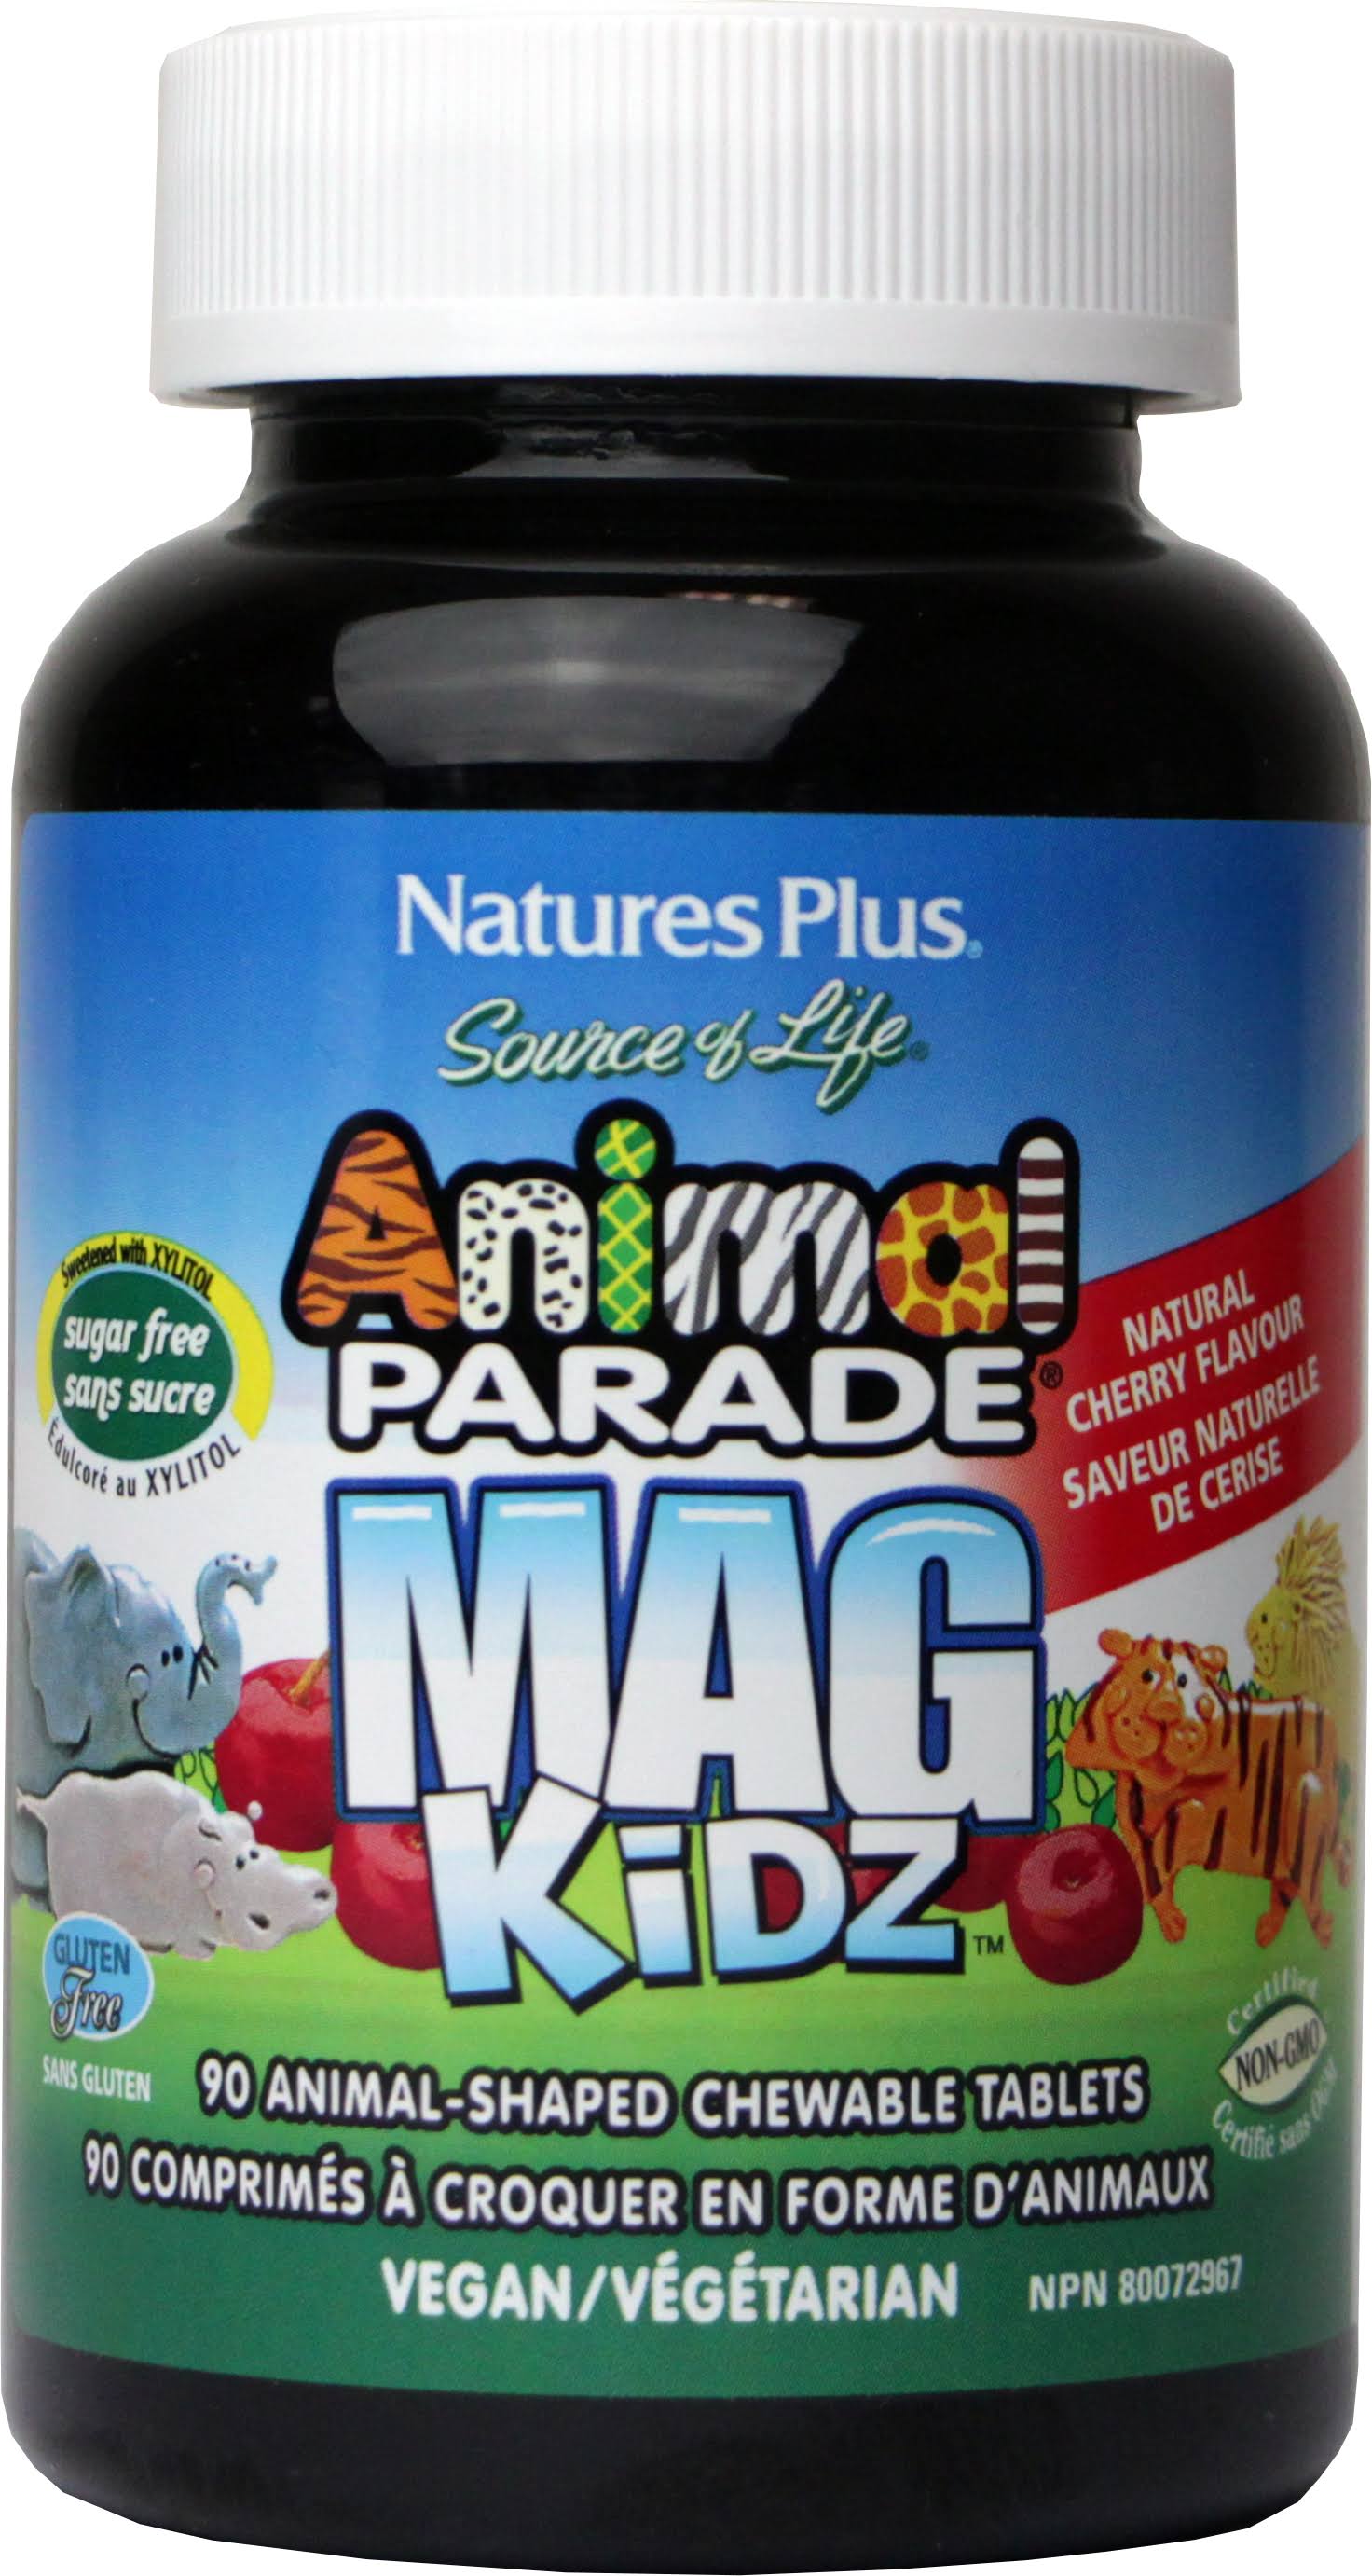 Nature's Plus Animal Parade Magkidz Supplements - 90ct